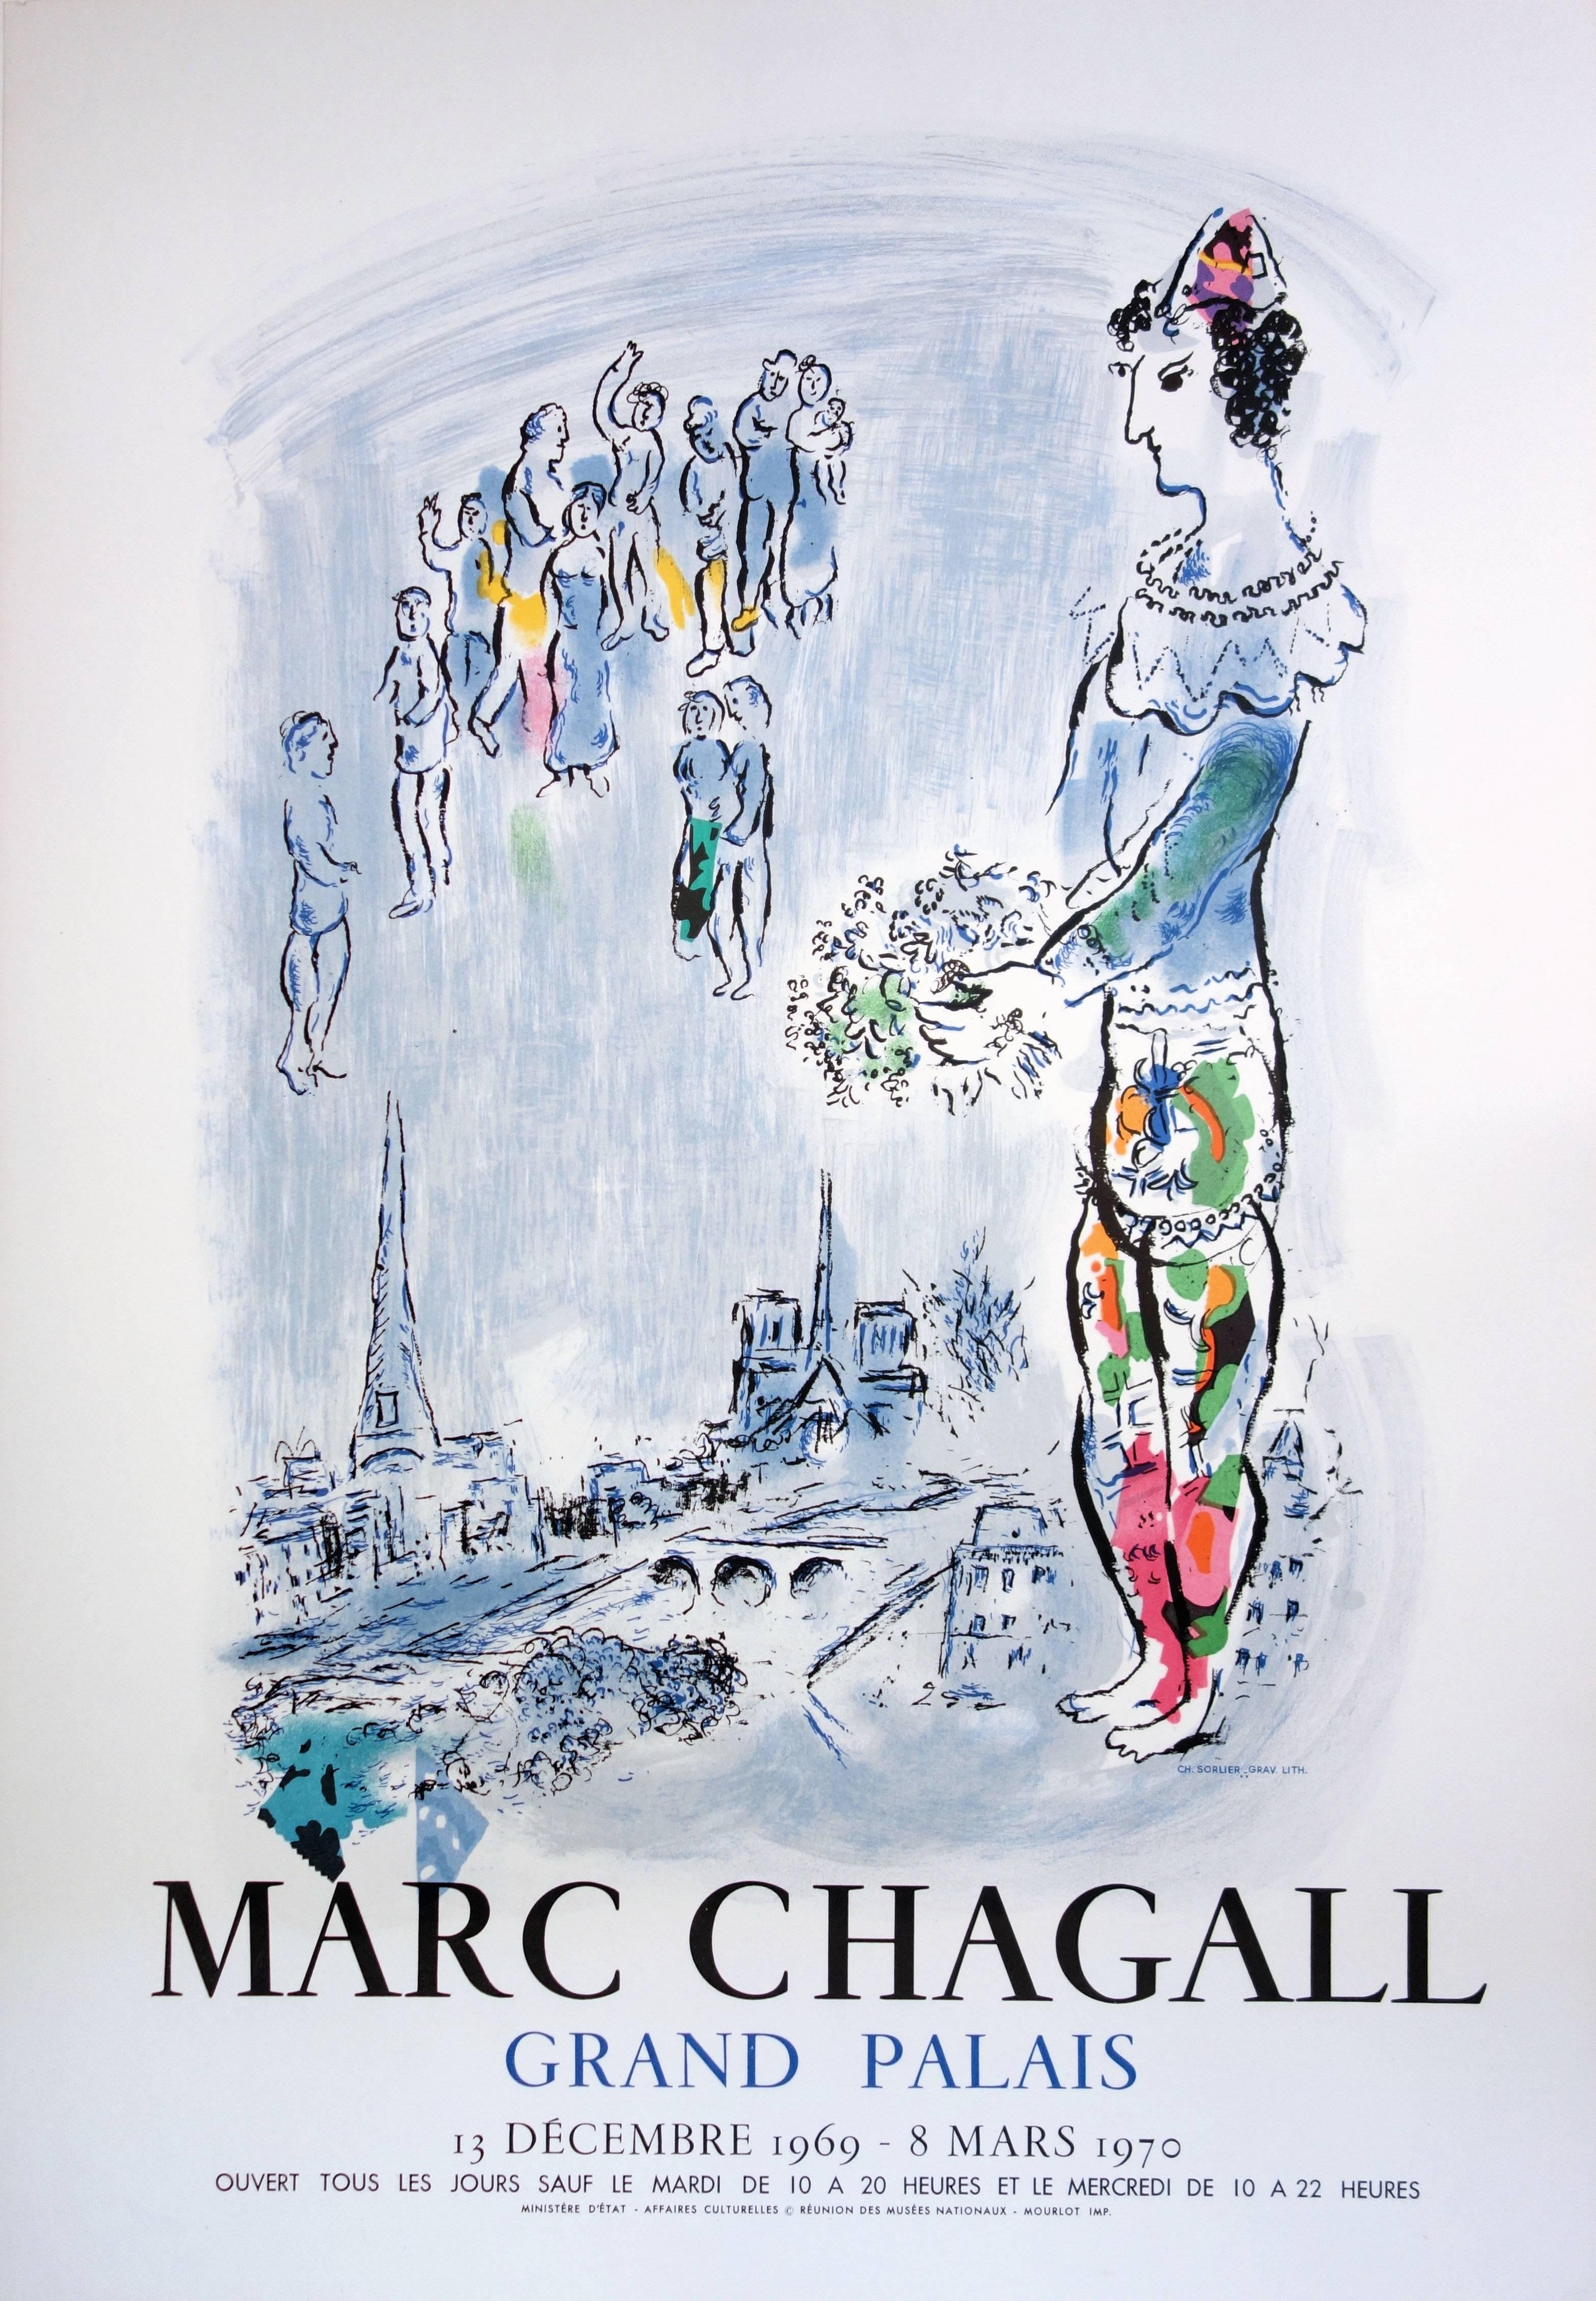 (after) Marc Chagall Figurative Print - Magician of Paris - Lithograph poster - Mourlot 1970